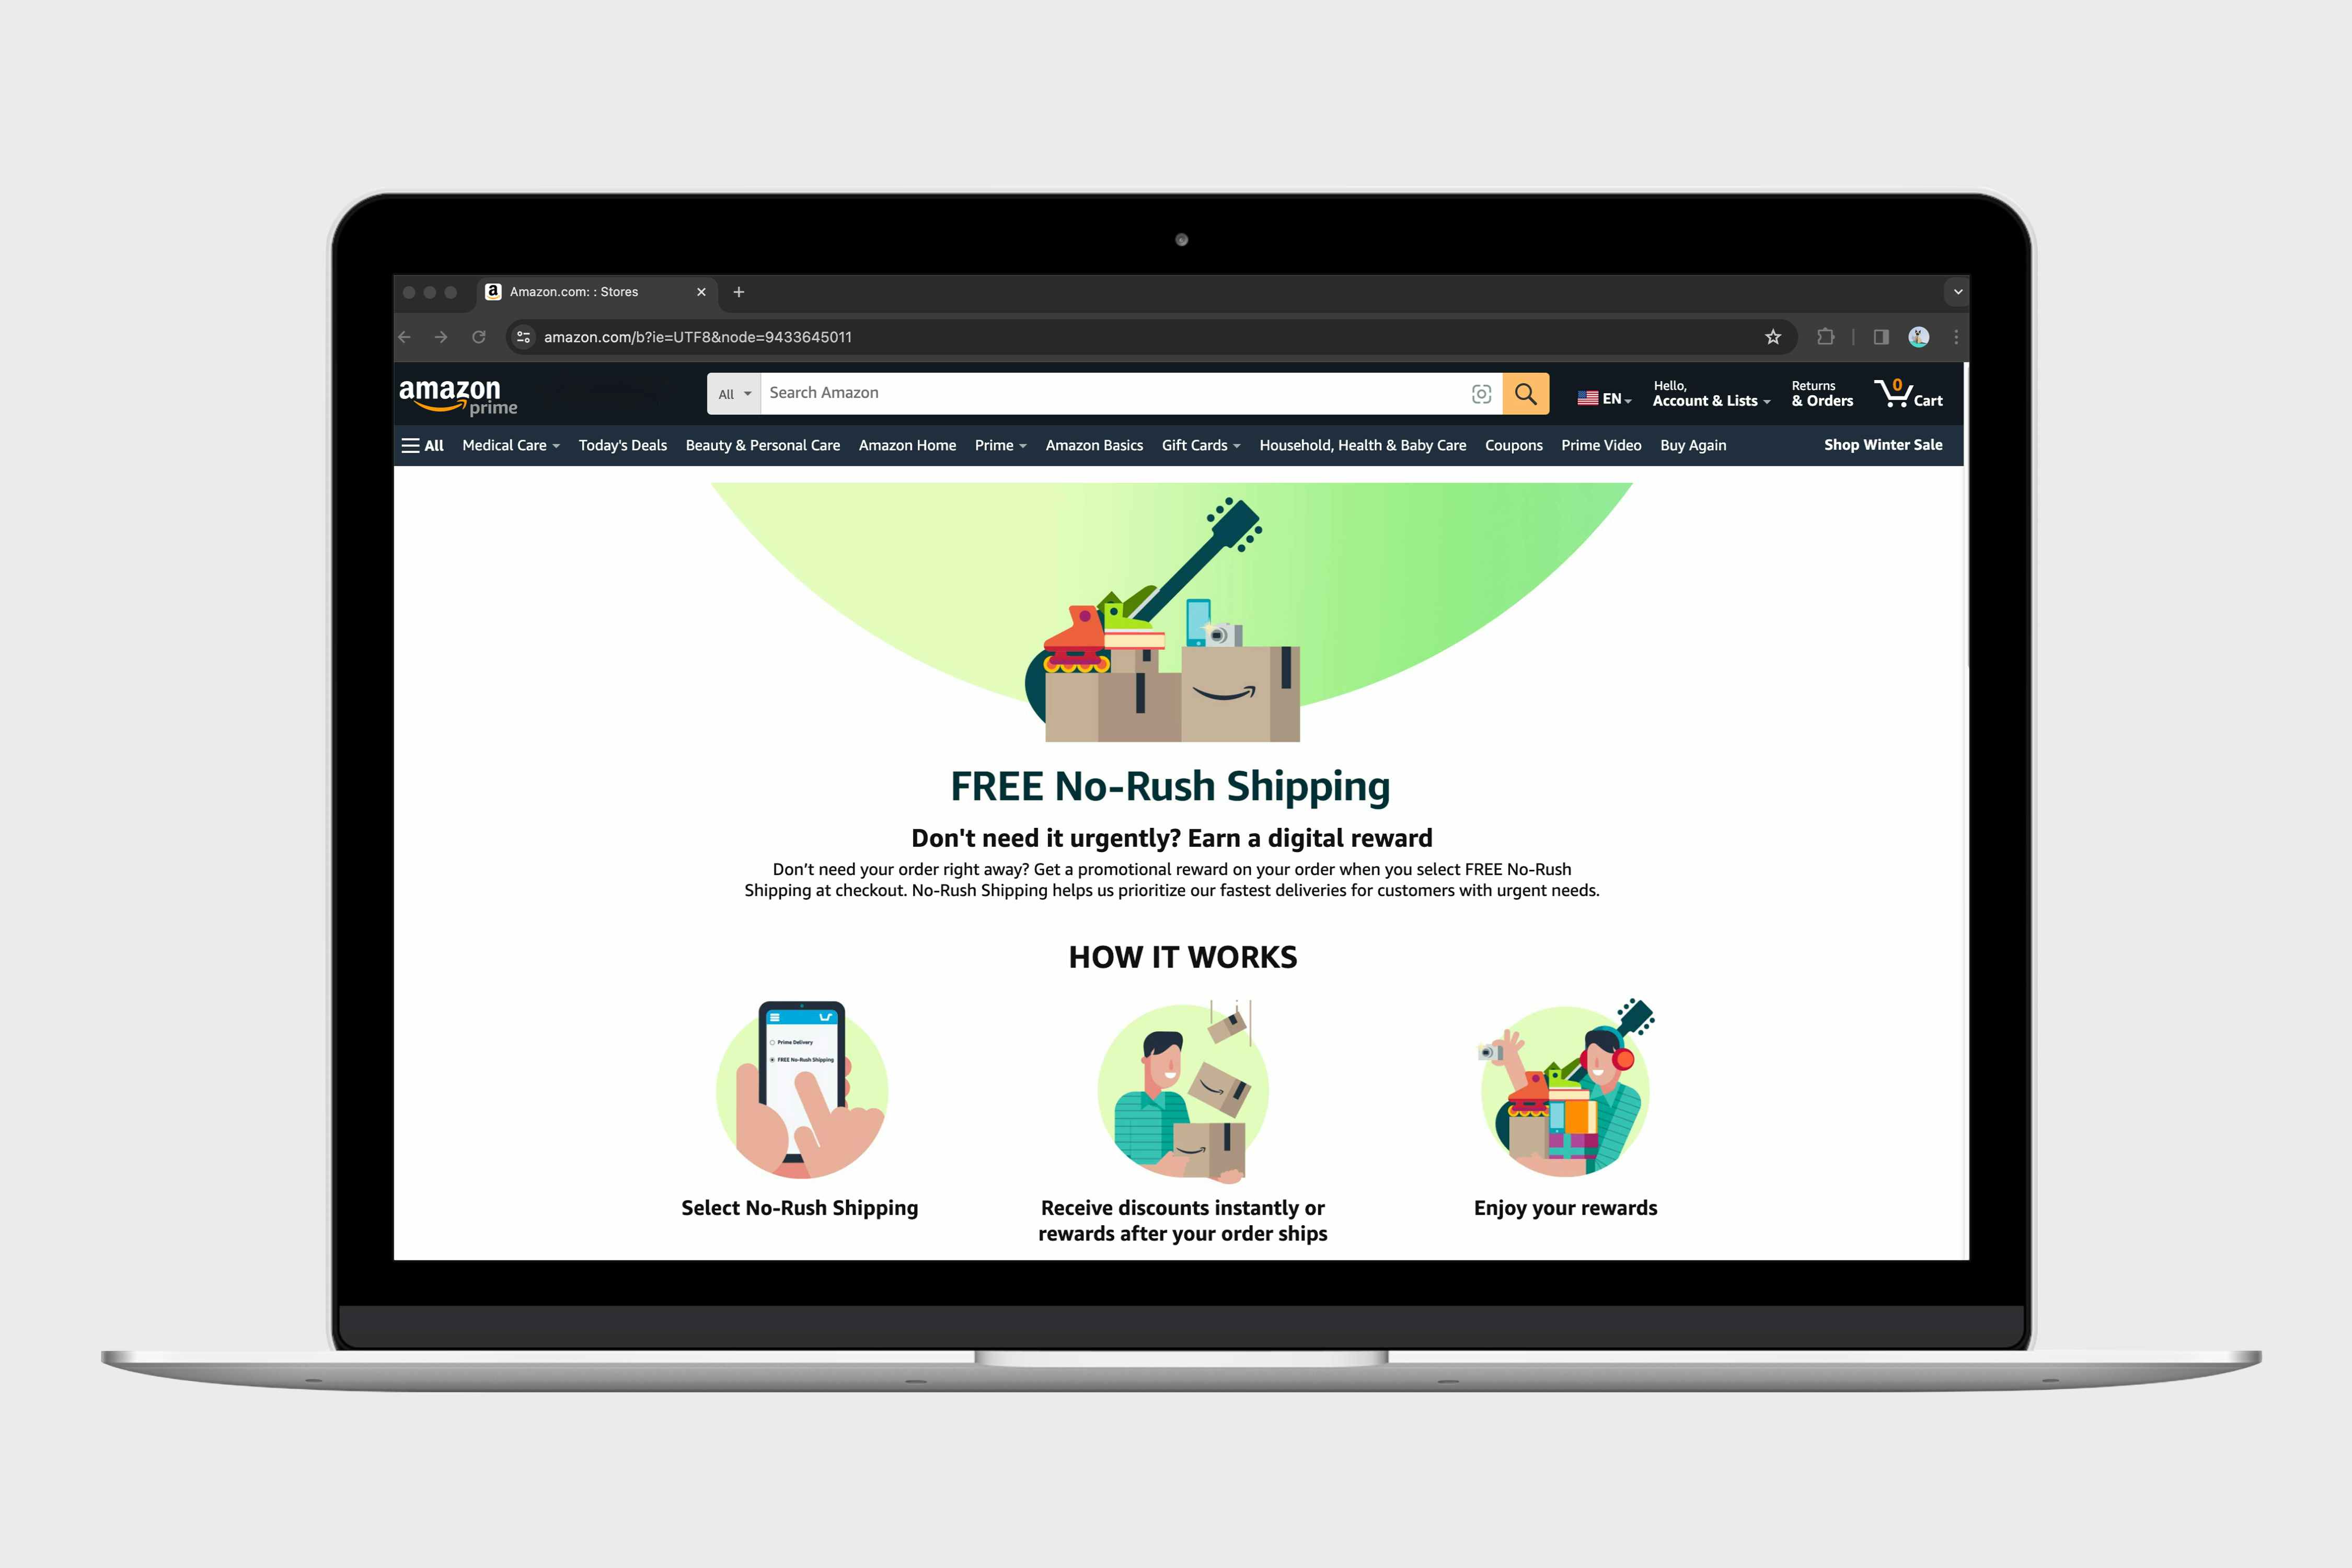 https://prod-cdn-thekrazycouponlady.imgix.net/wp-content/uploads/2021/10/amazon-no-rush-shipping-digital-rewards-webpage-graphic-1704319510-1704319510.png?auto=format&fit=fill&q=25